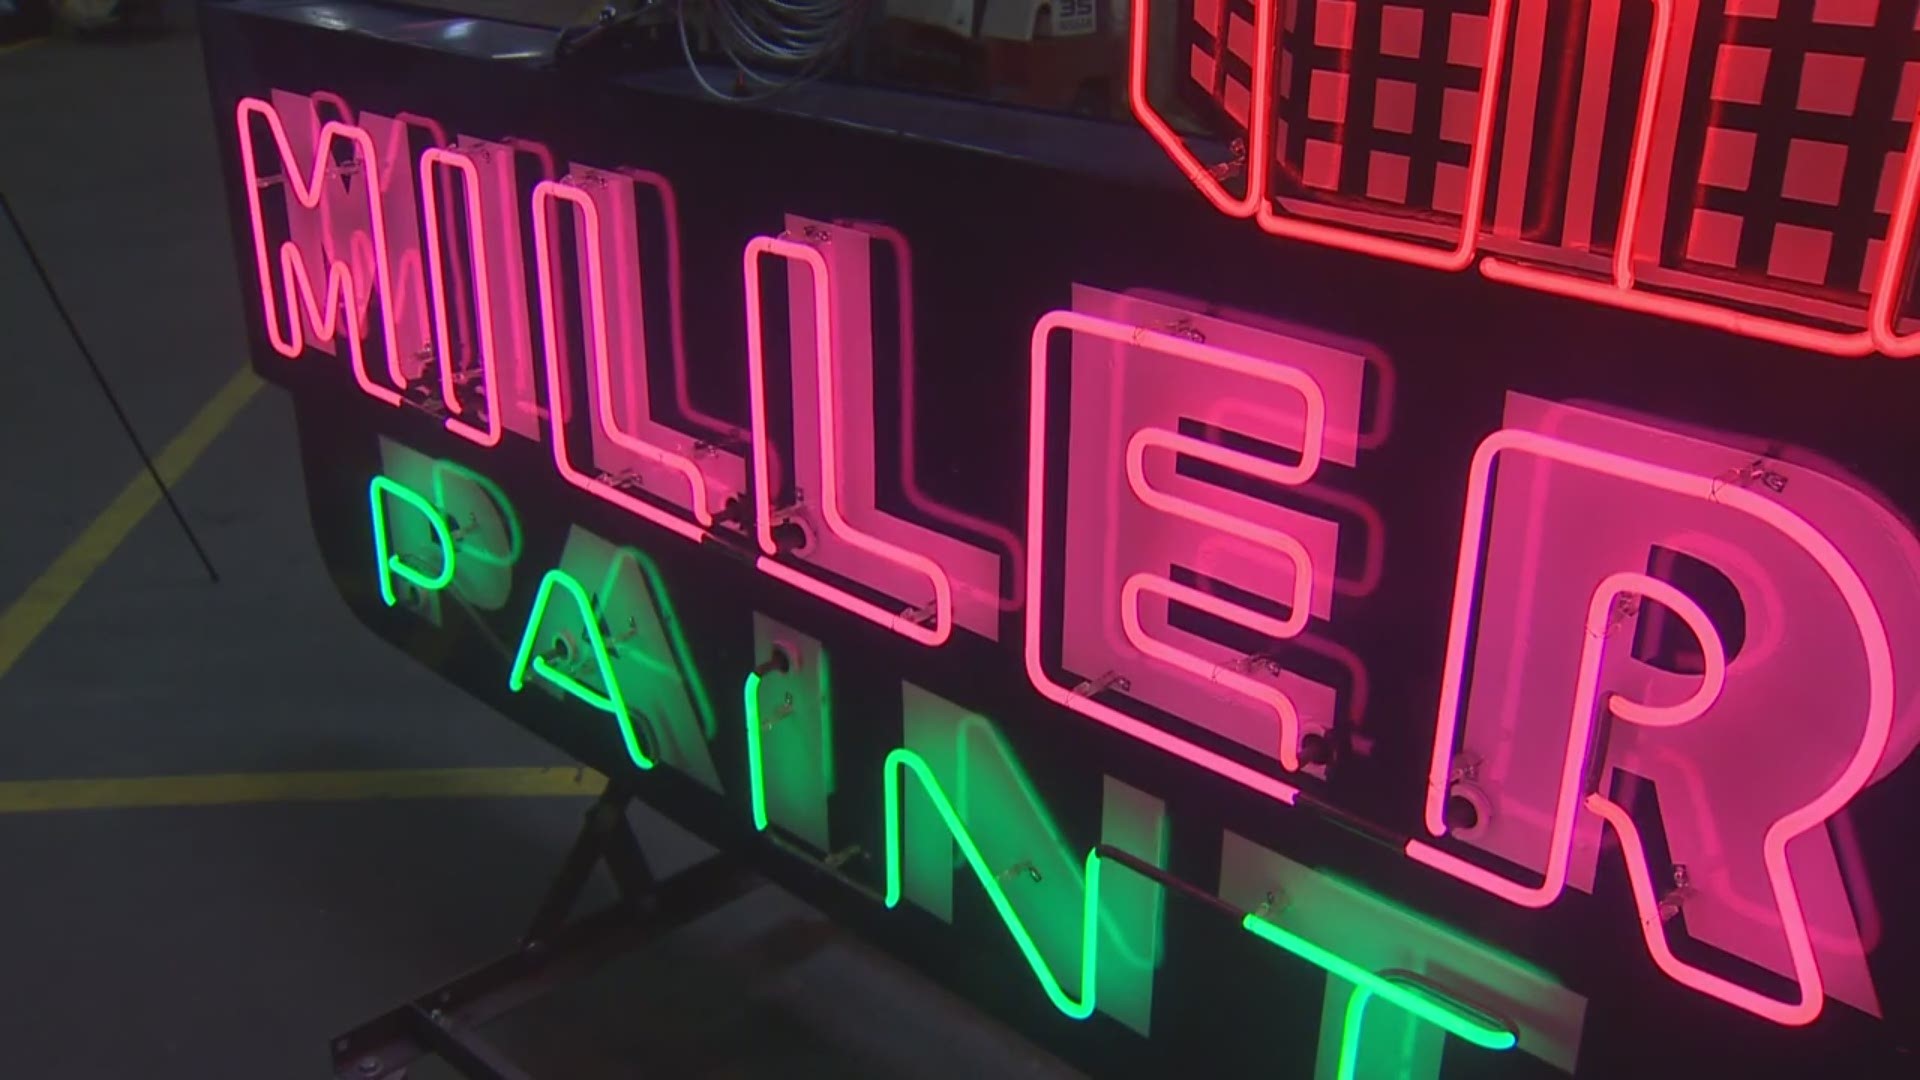 Miller Paint is celebrating its 130th anniversary.
#TonightwithCassidy